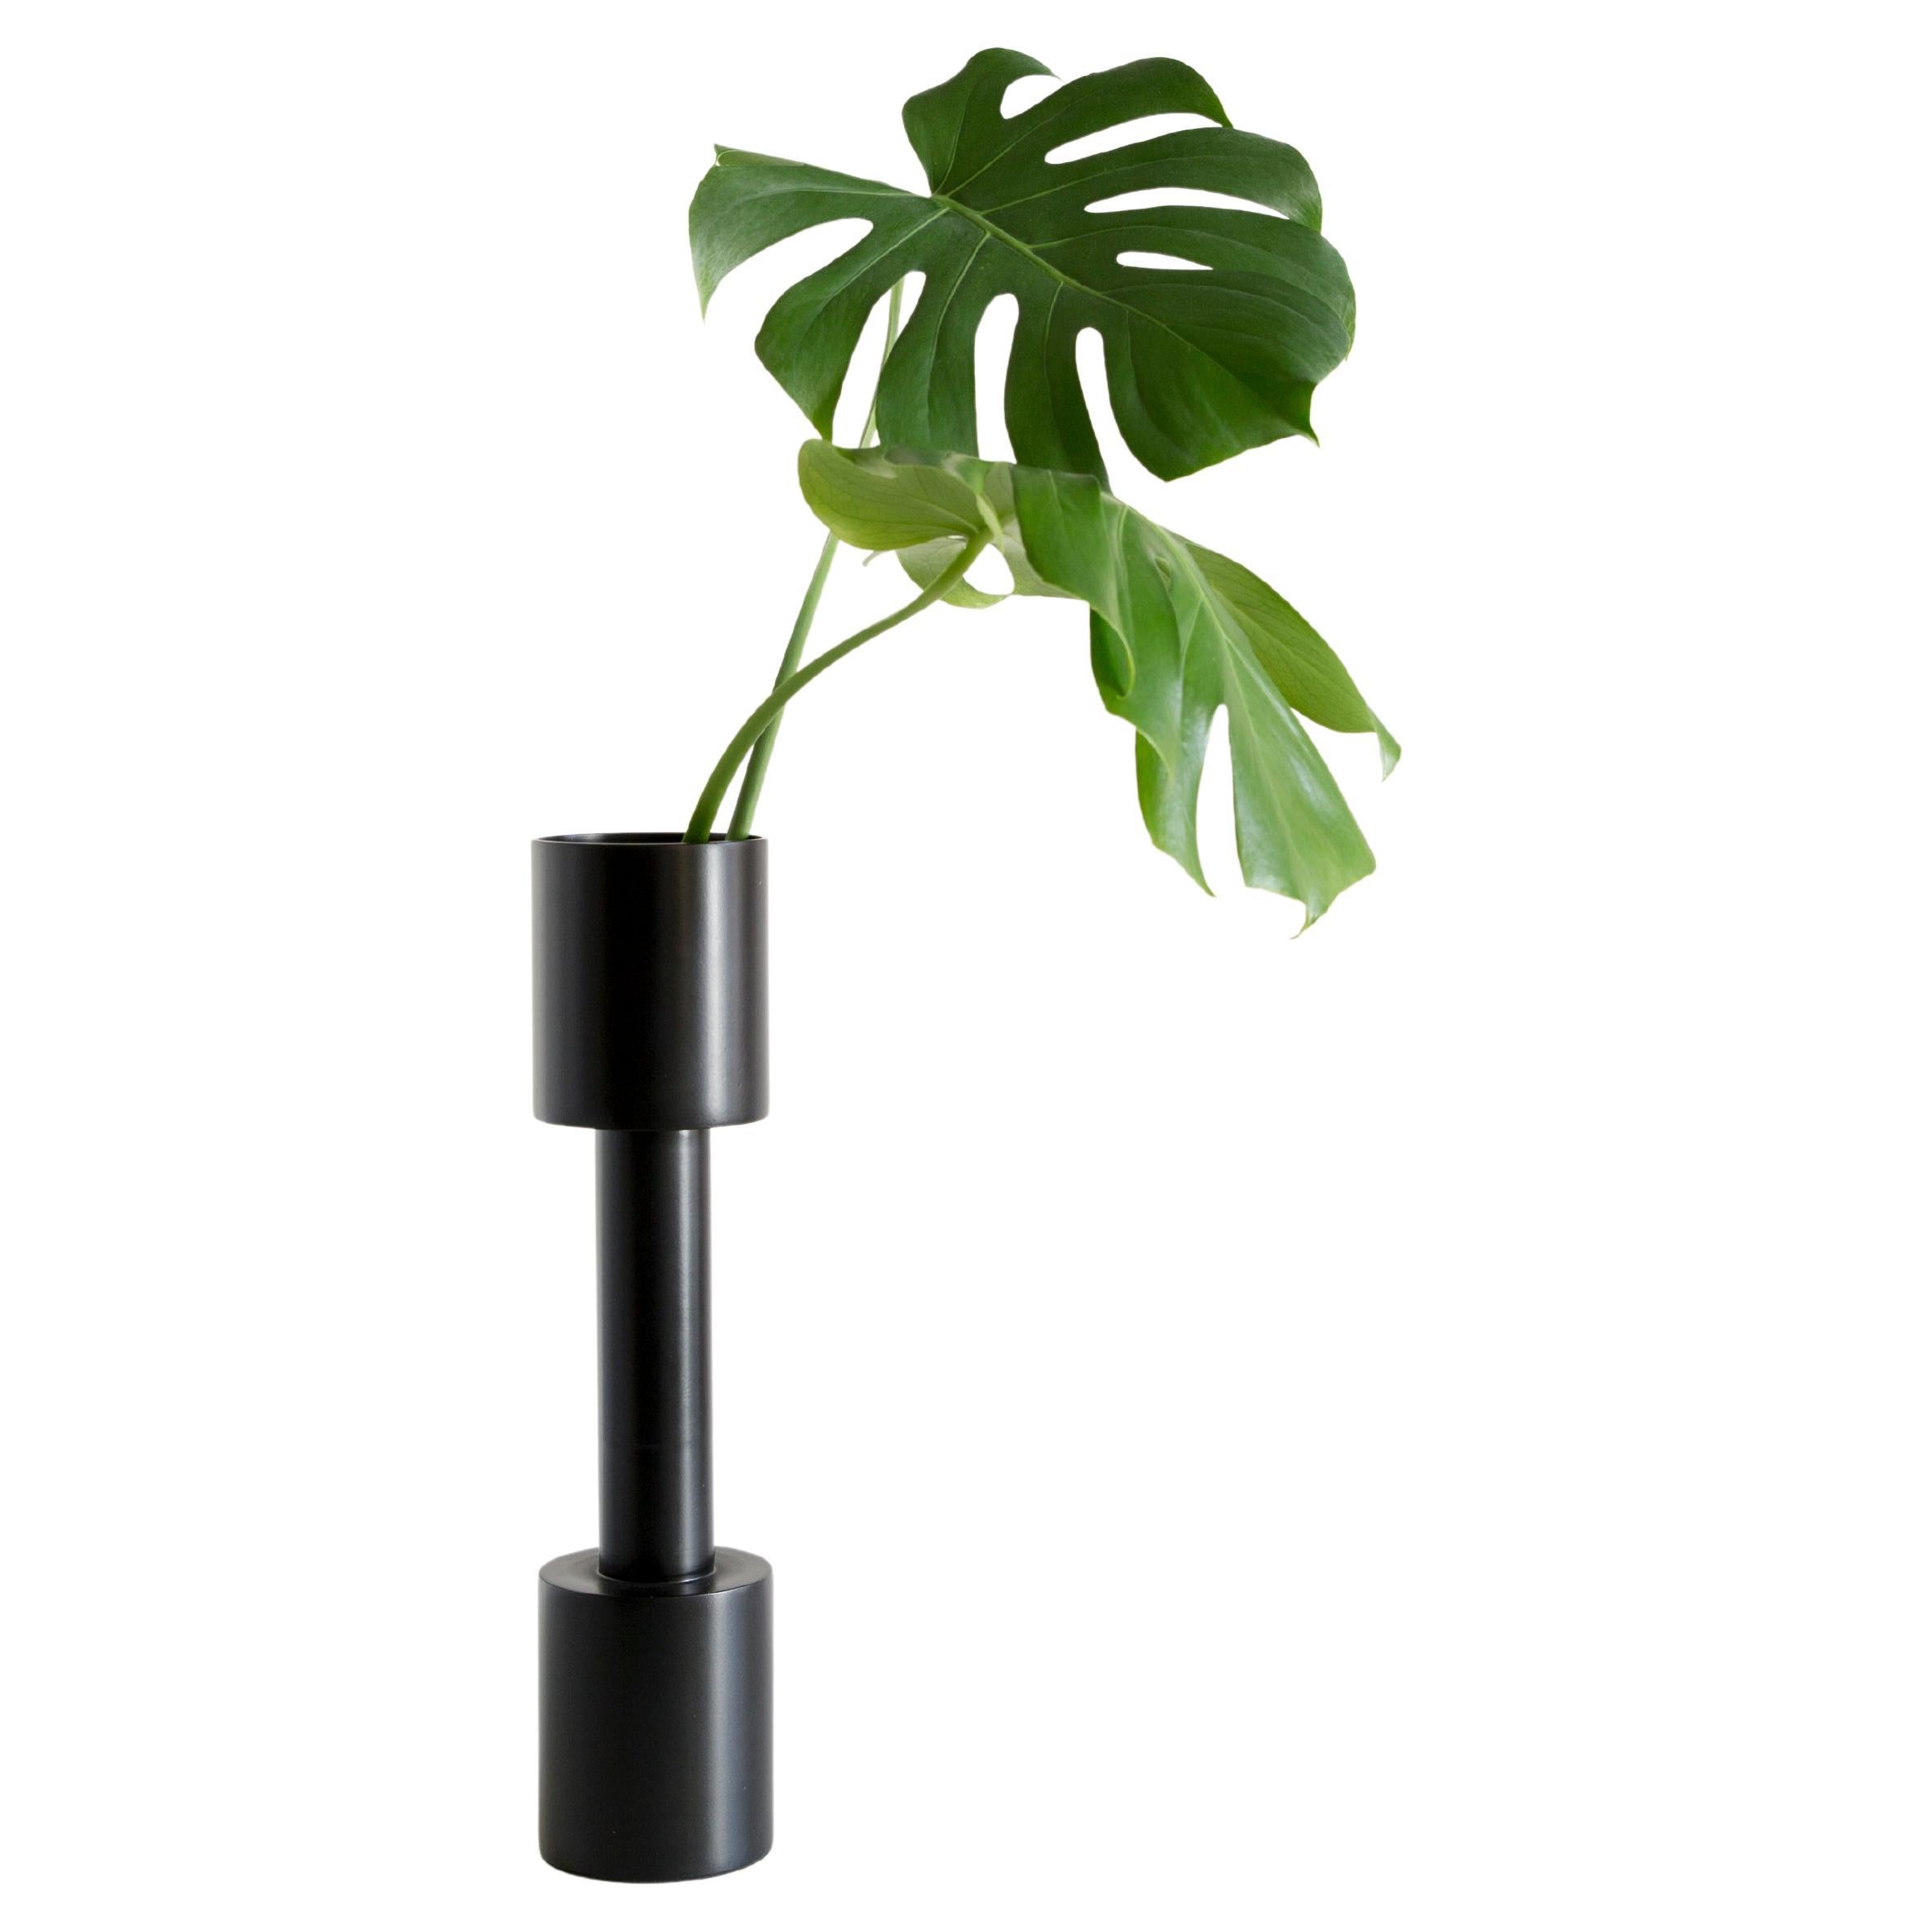 The MEDEIA Trio is not only diverse through its geometric cuts. Each vase has its purpose of a bouquet of flowers. Since MEDEIA BOLD restrains the wild branches, MEDEIA SLIM loves to hold just one flower. MEDEIA MIDI is self-confident even without